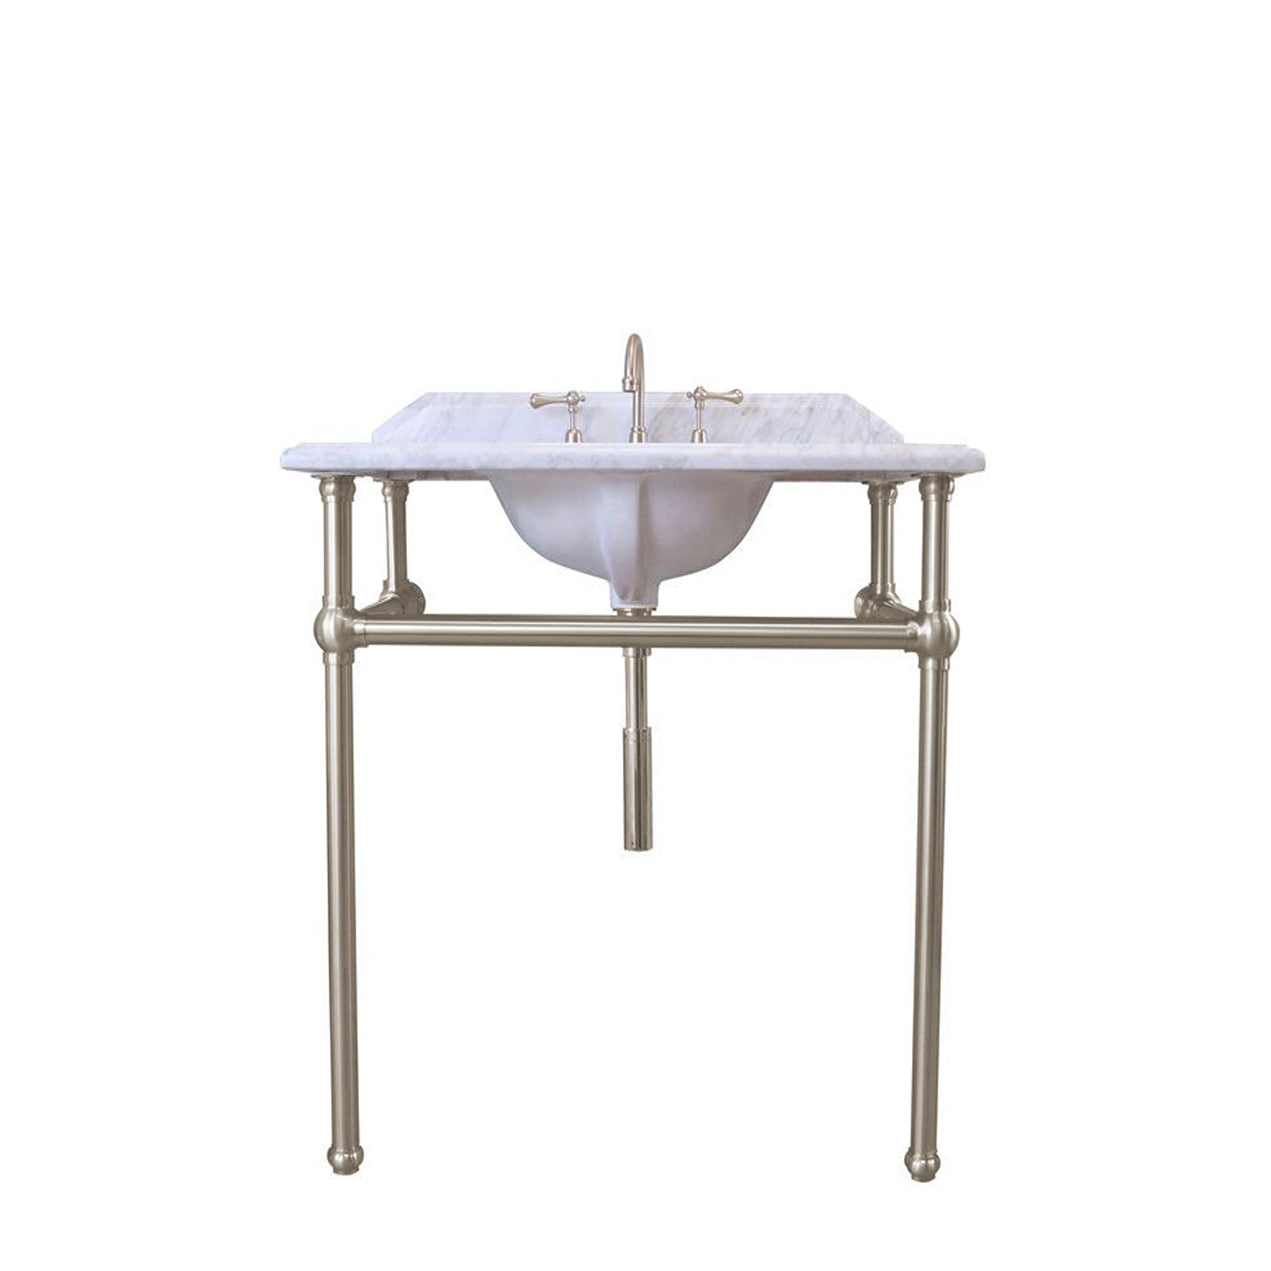 TURNER HASTINGS MAYER BASIN STAND WITH REAL CARRARA MARBLE TOP BRUSHED NICKEL 750MM